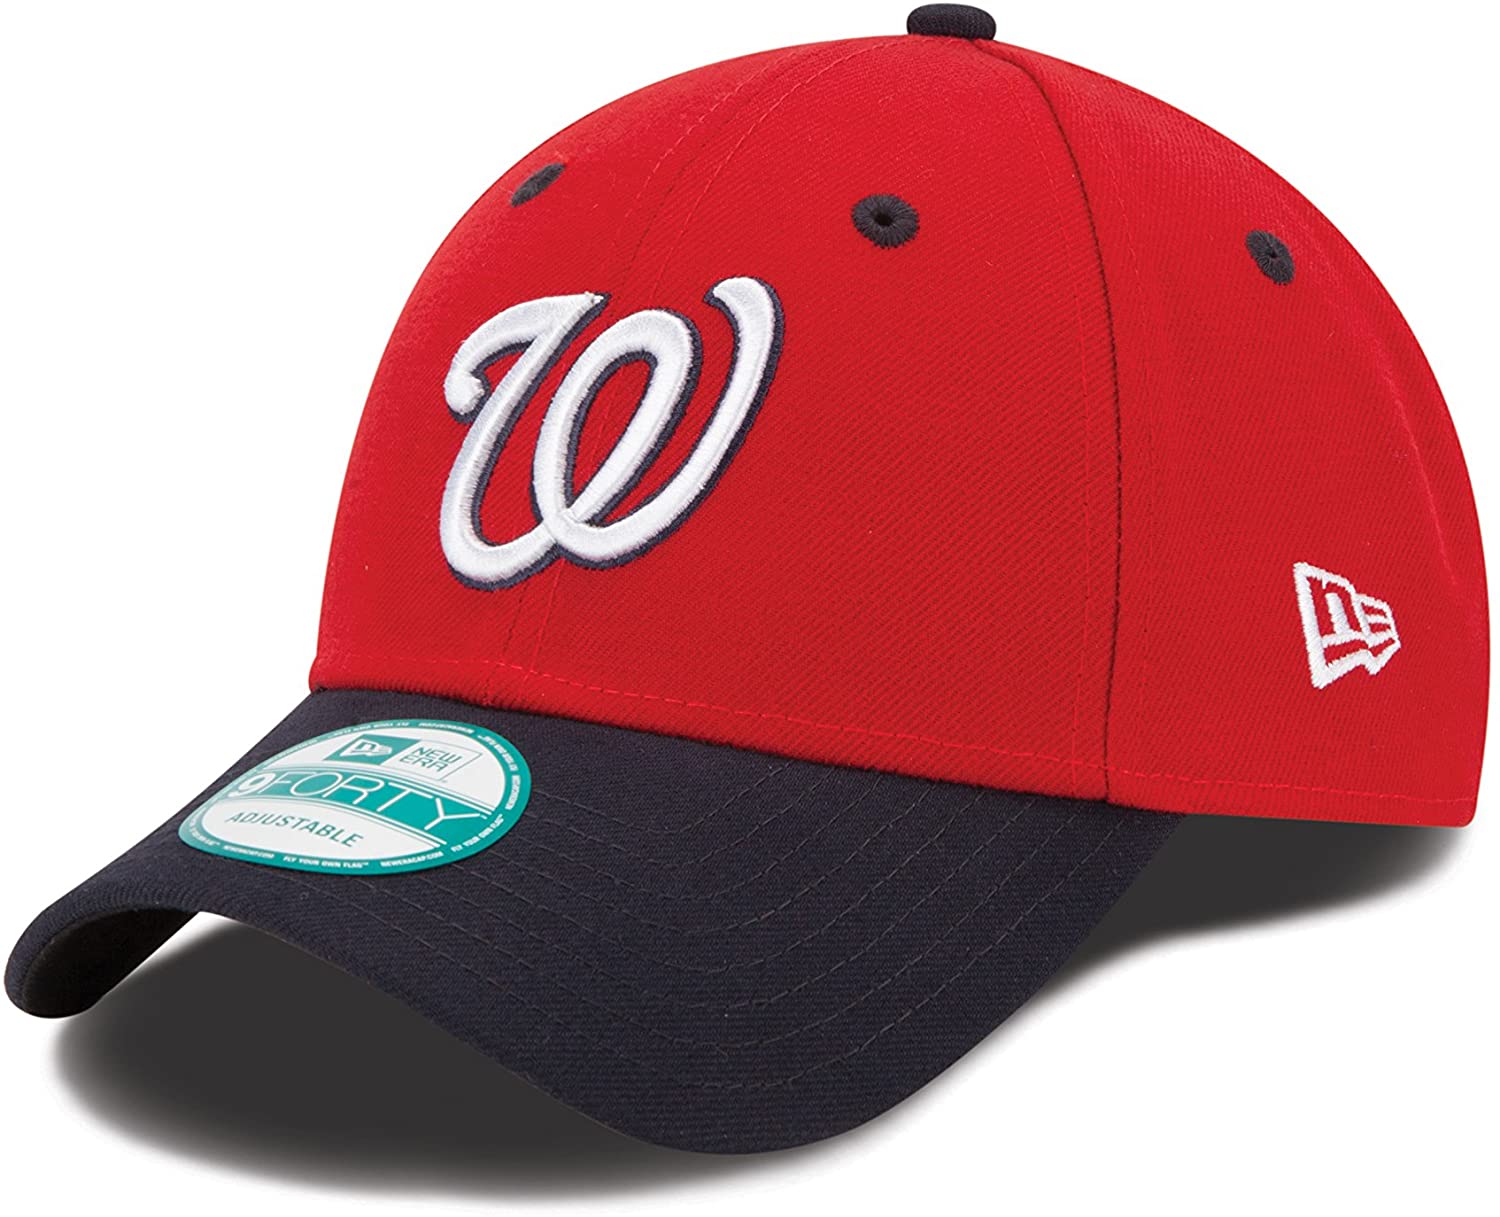 New Era 9Forty MLB Washington Nationals The League Red/Navy Blue Adjustable Cap